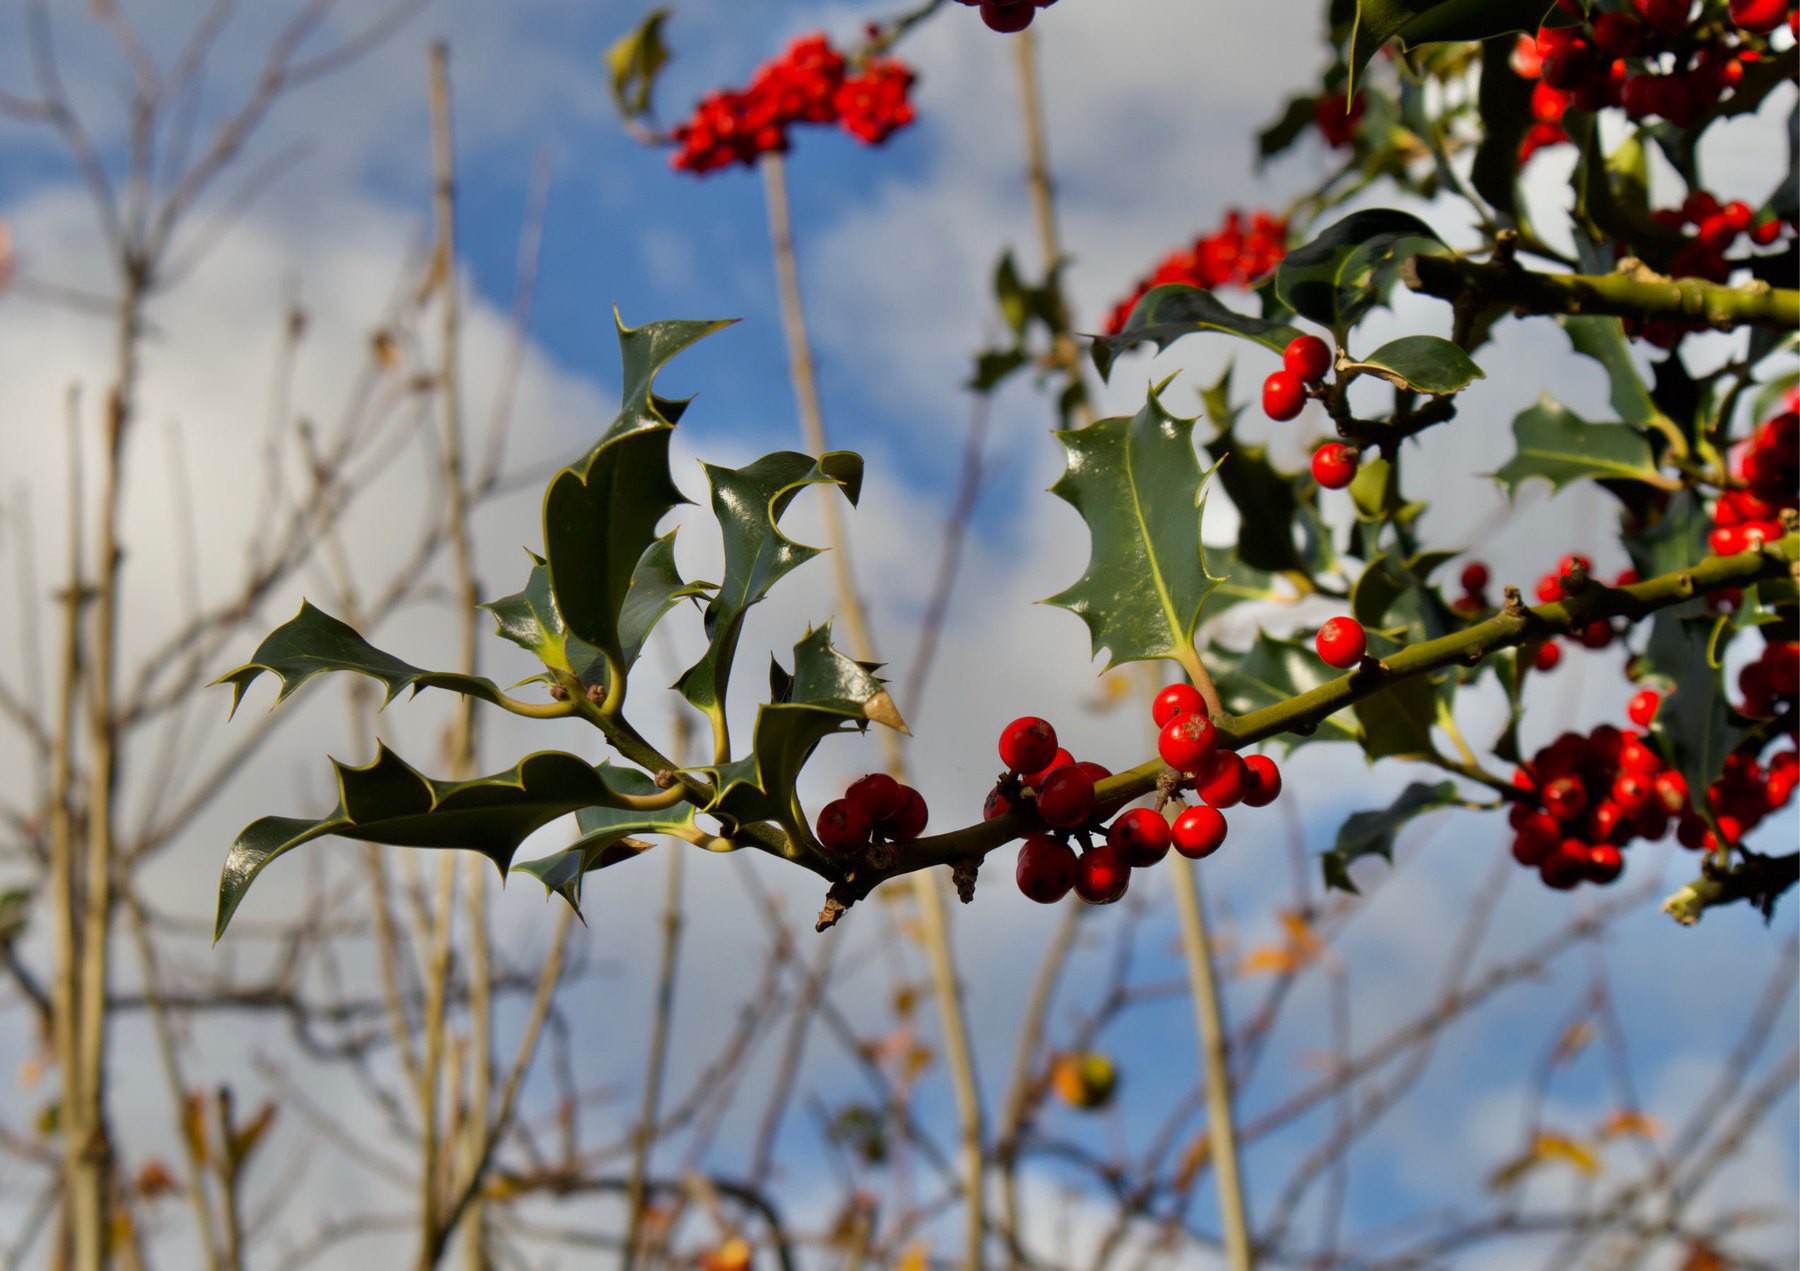 Holly growing by the community centre in Shoreham-by-Sea